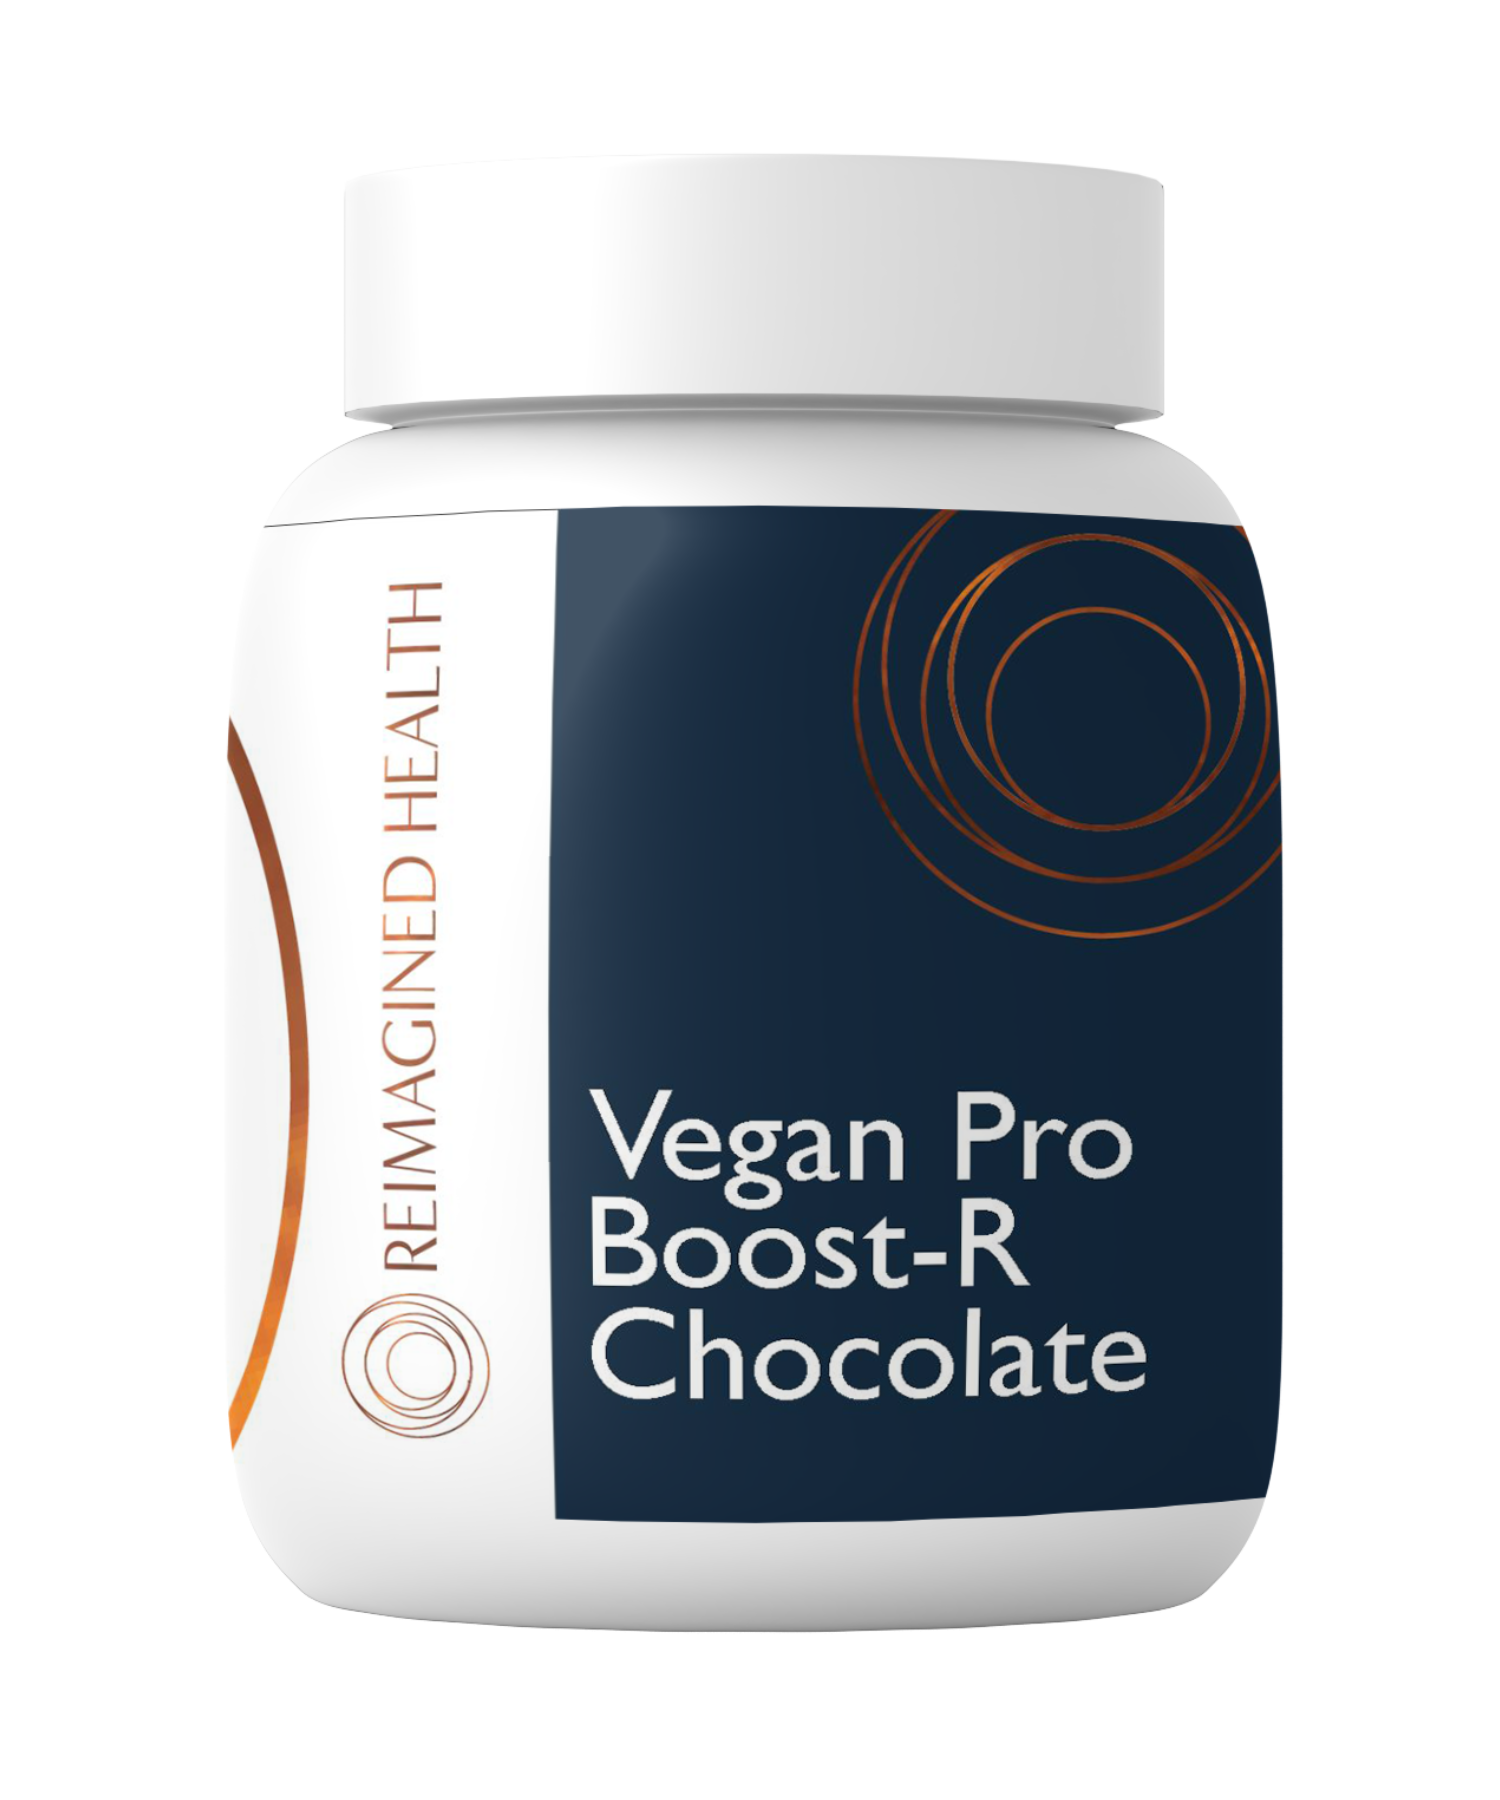 Vegan-Pro-Boost-R-Chocolate-A777-1.png